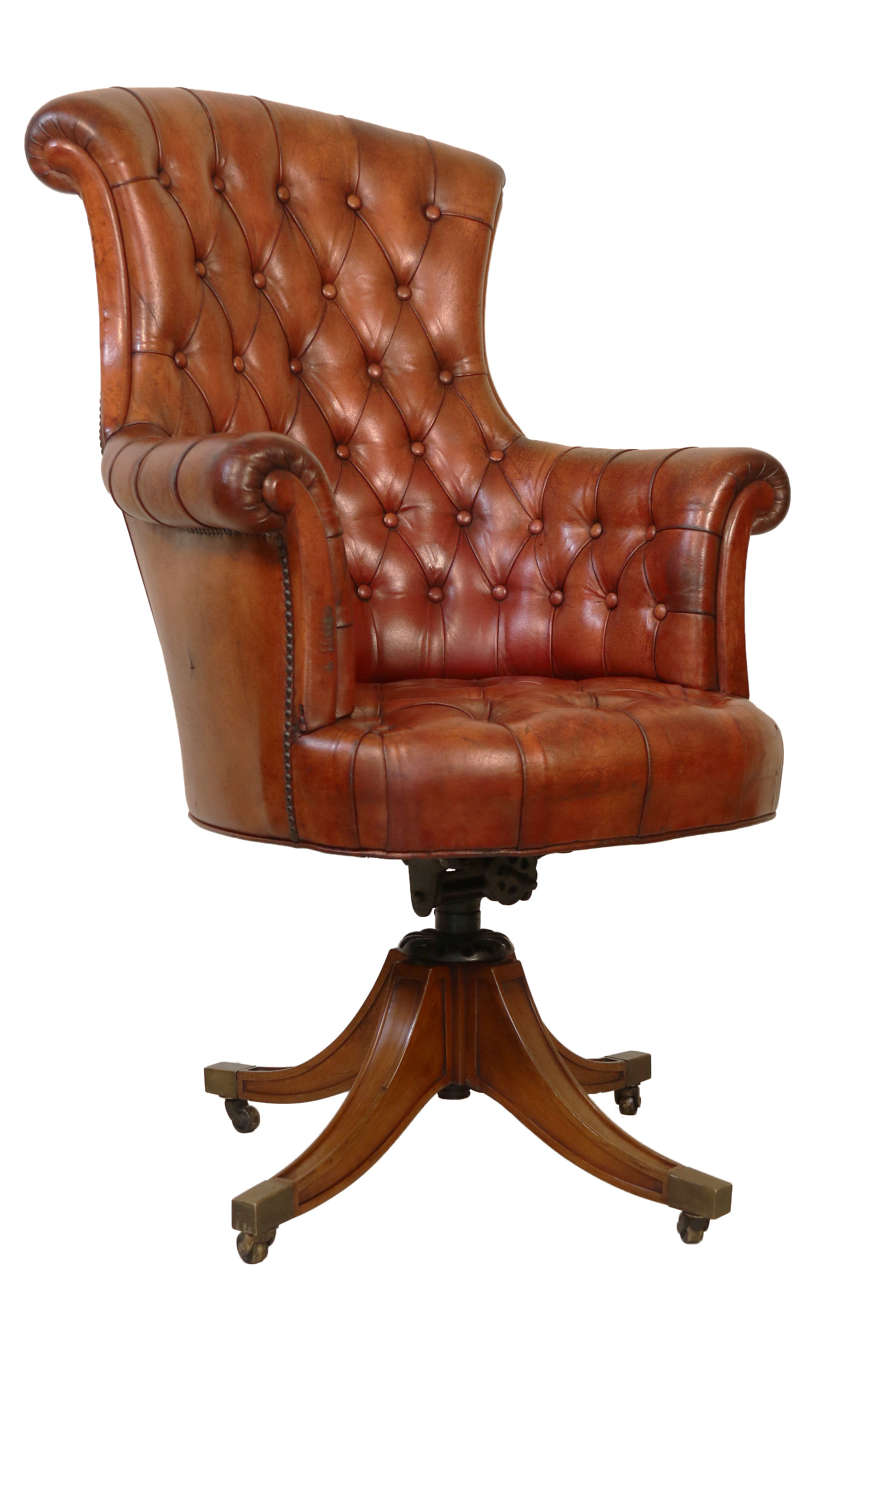 Early 20th century leather upholstered fully adjustable desk chair